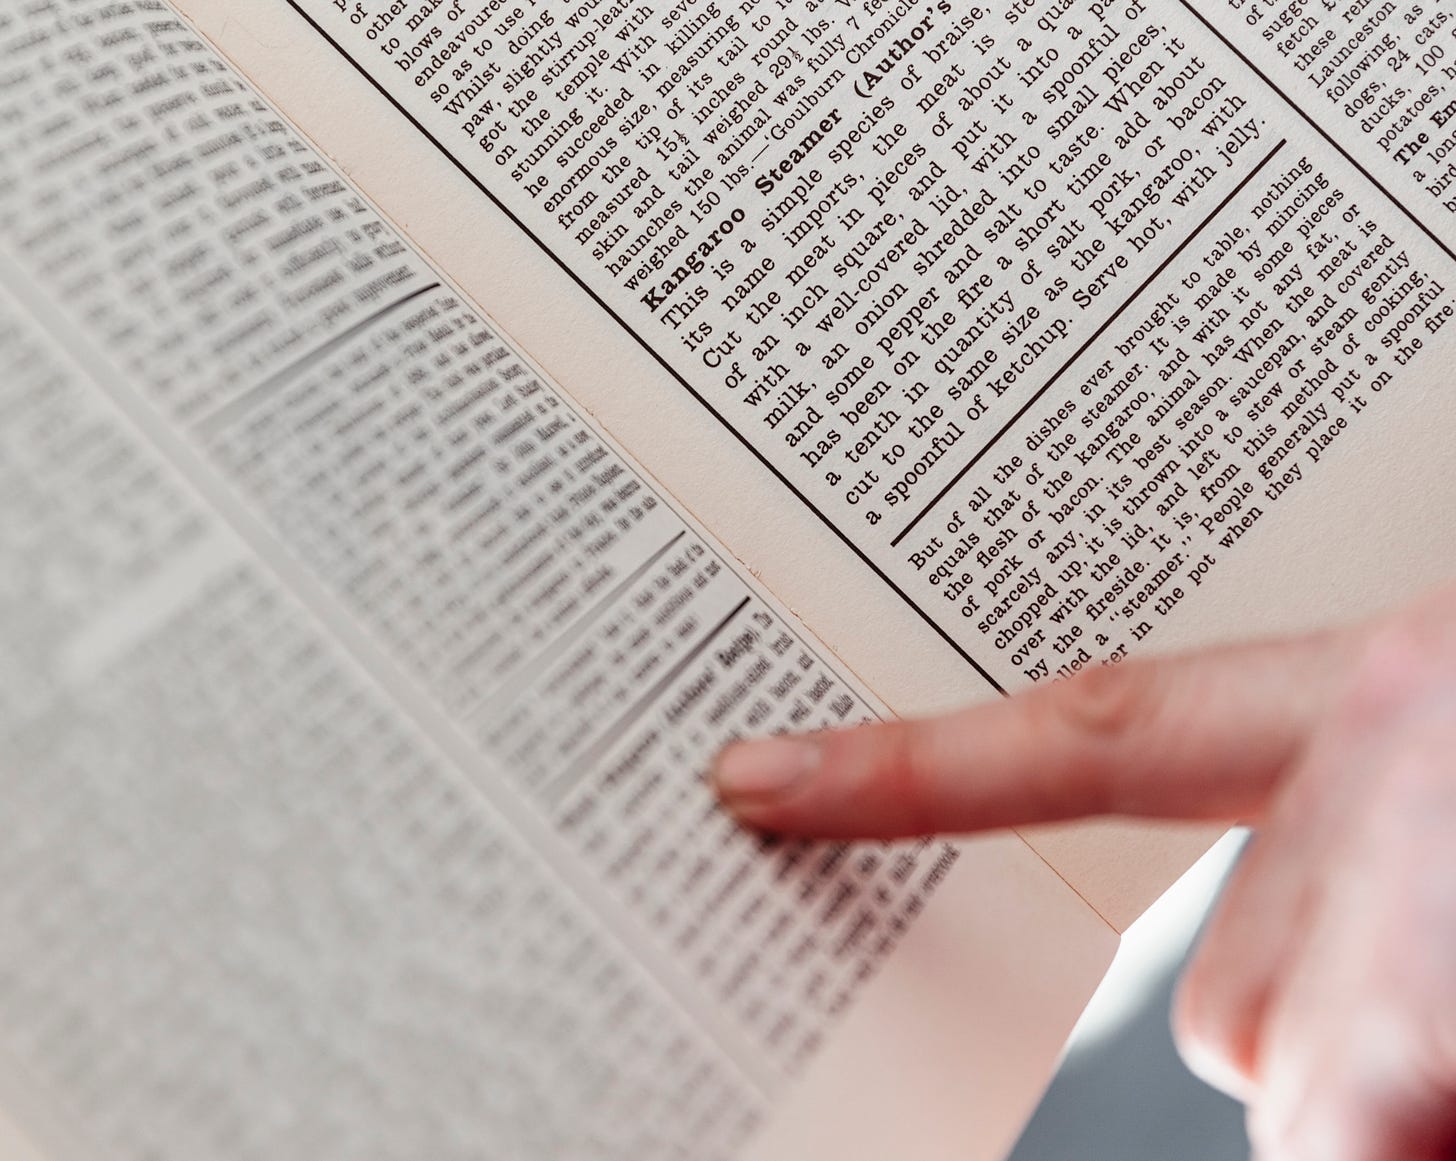 A human finger points to a page of dense printed text